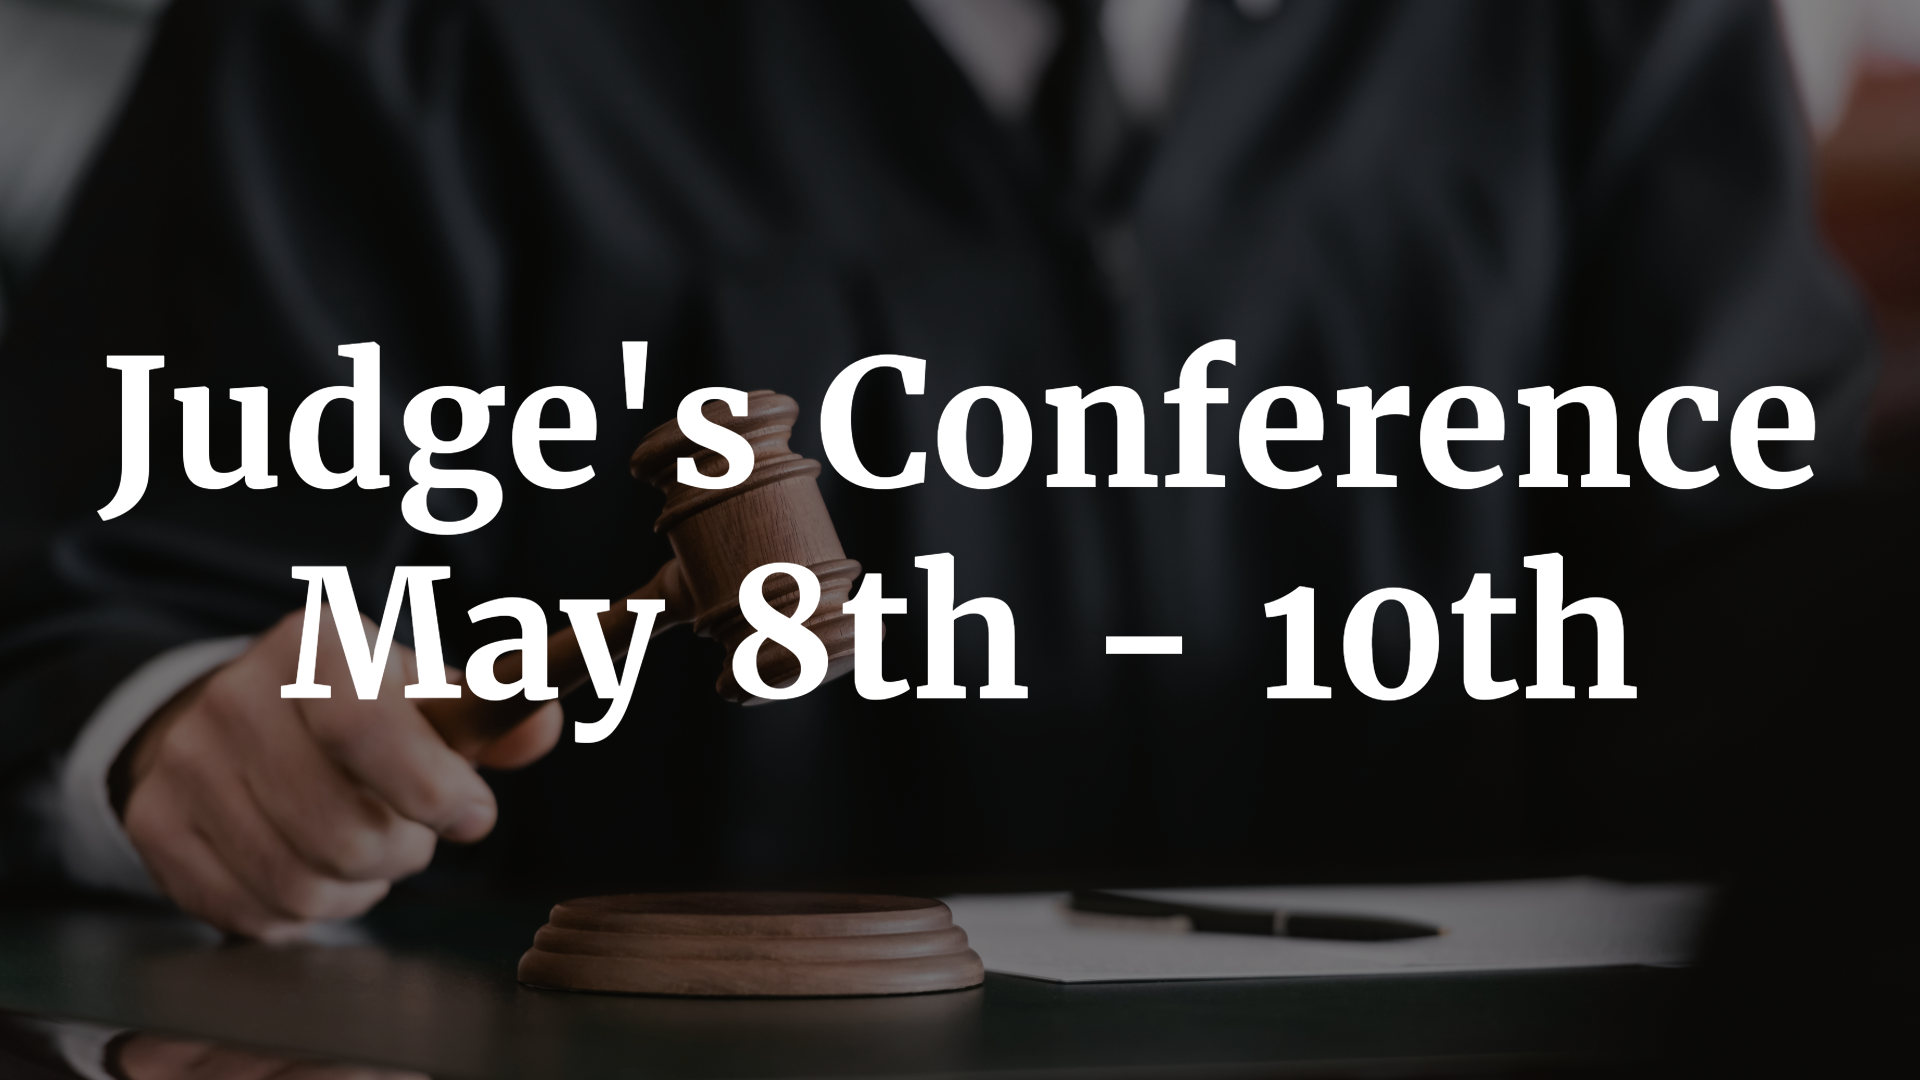 Featured image for “Judge’s Conference May 8th – 10th”